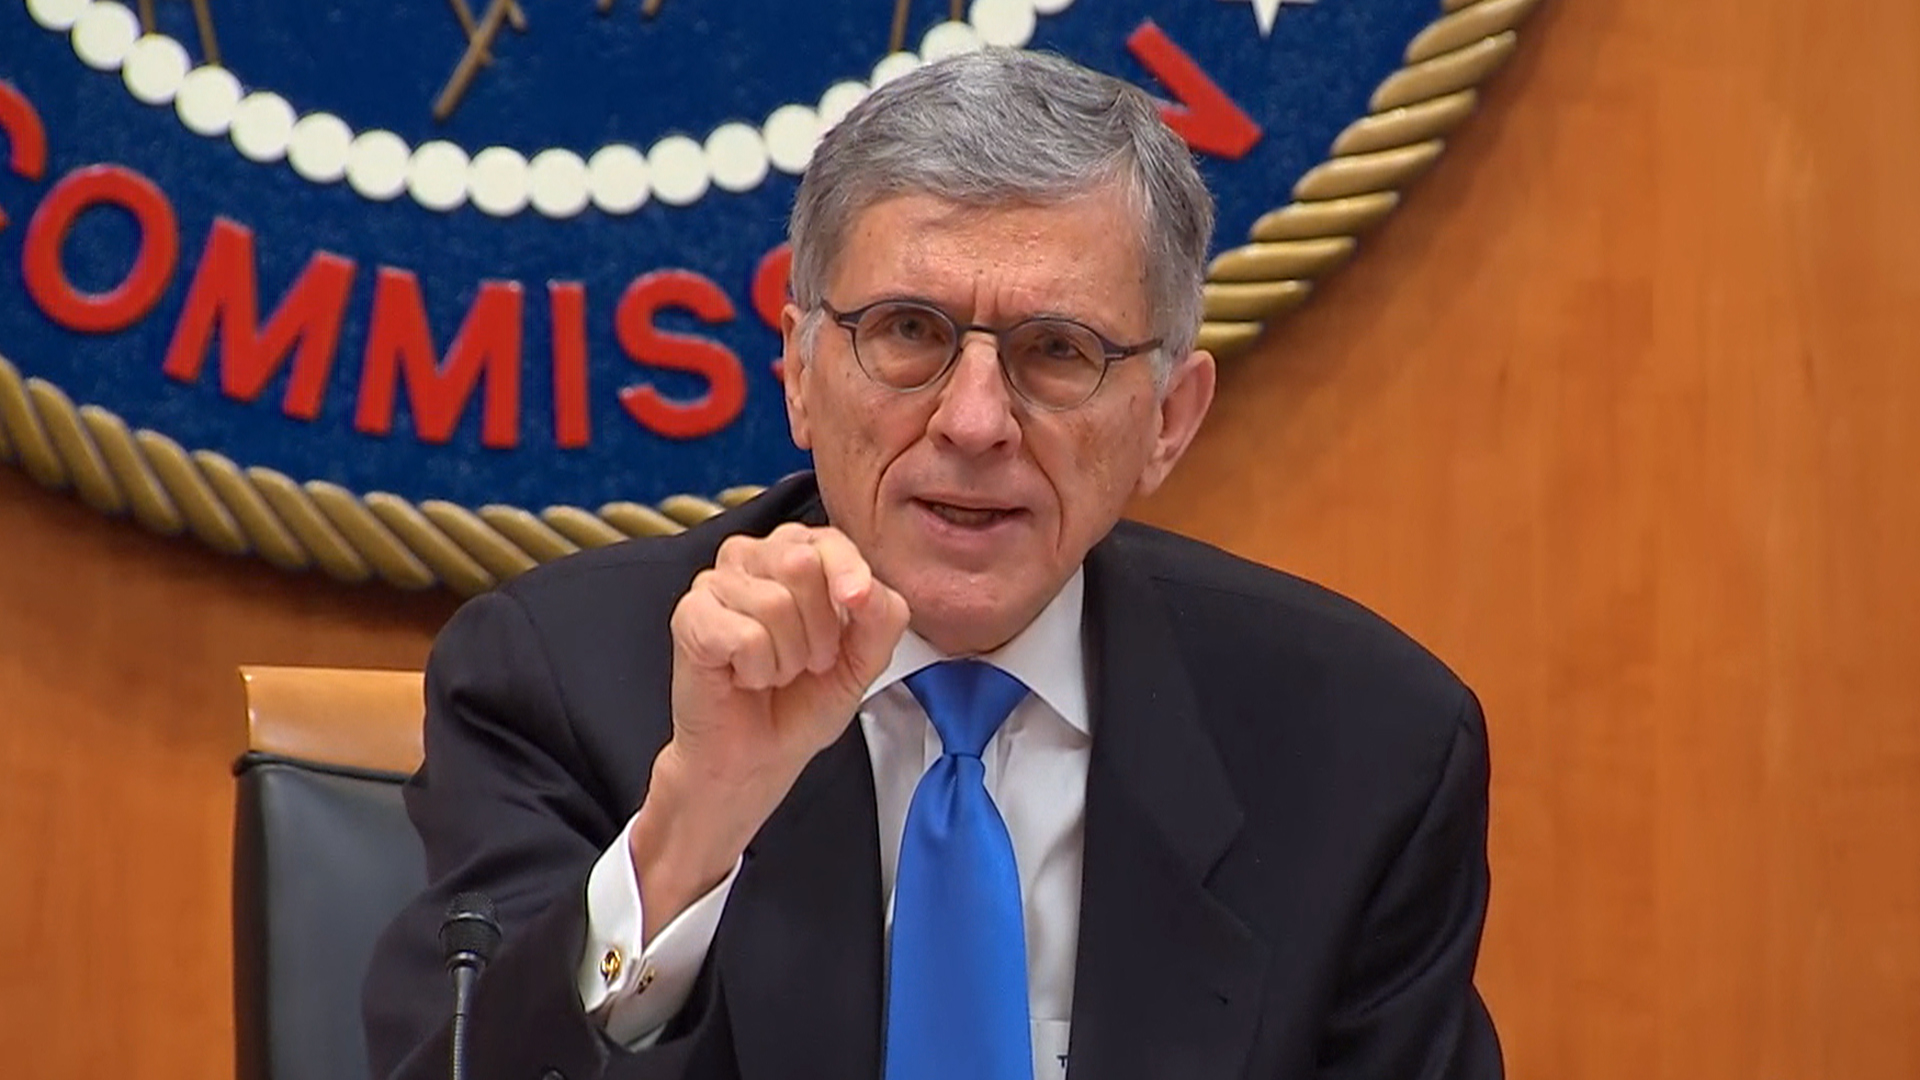 4 Million Americans Get 'Shout-Out' at Net Neutrality Vote